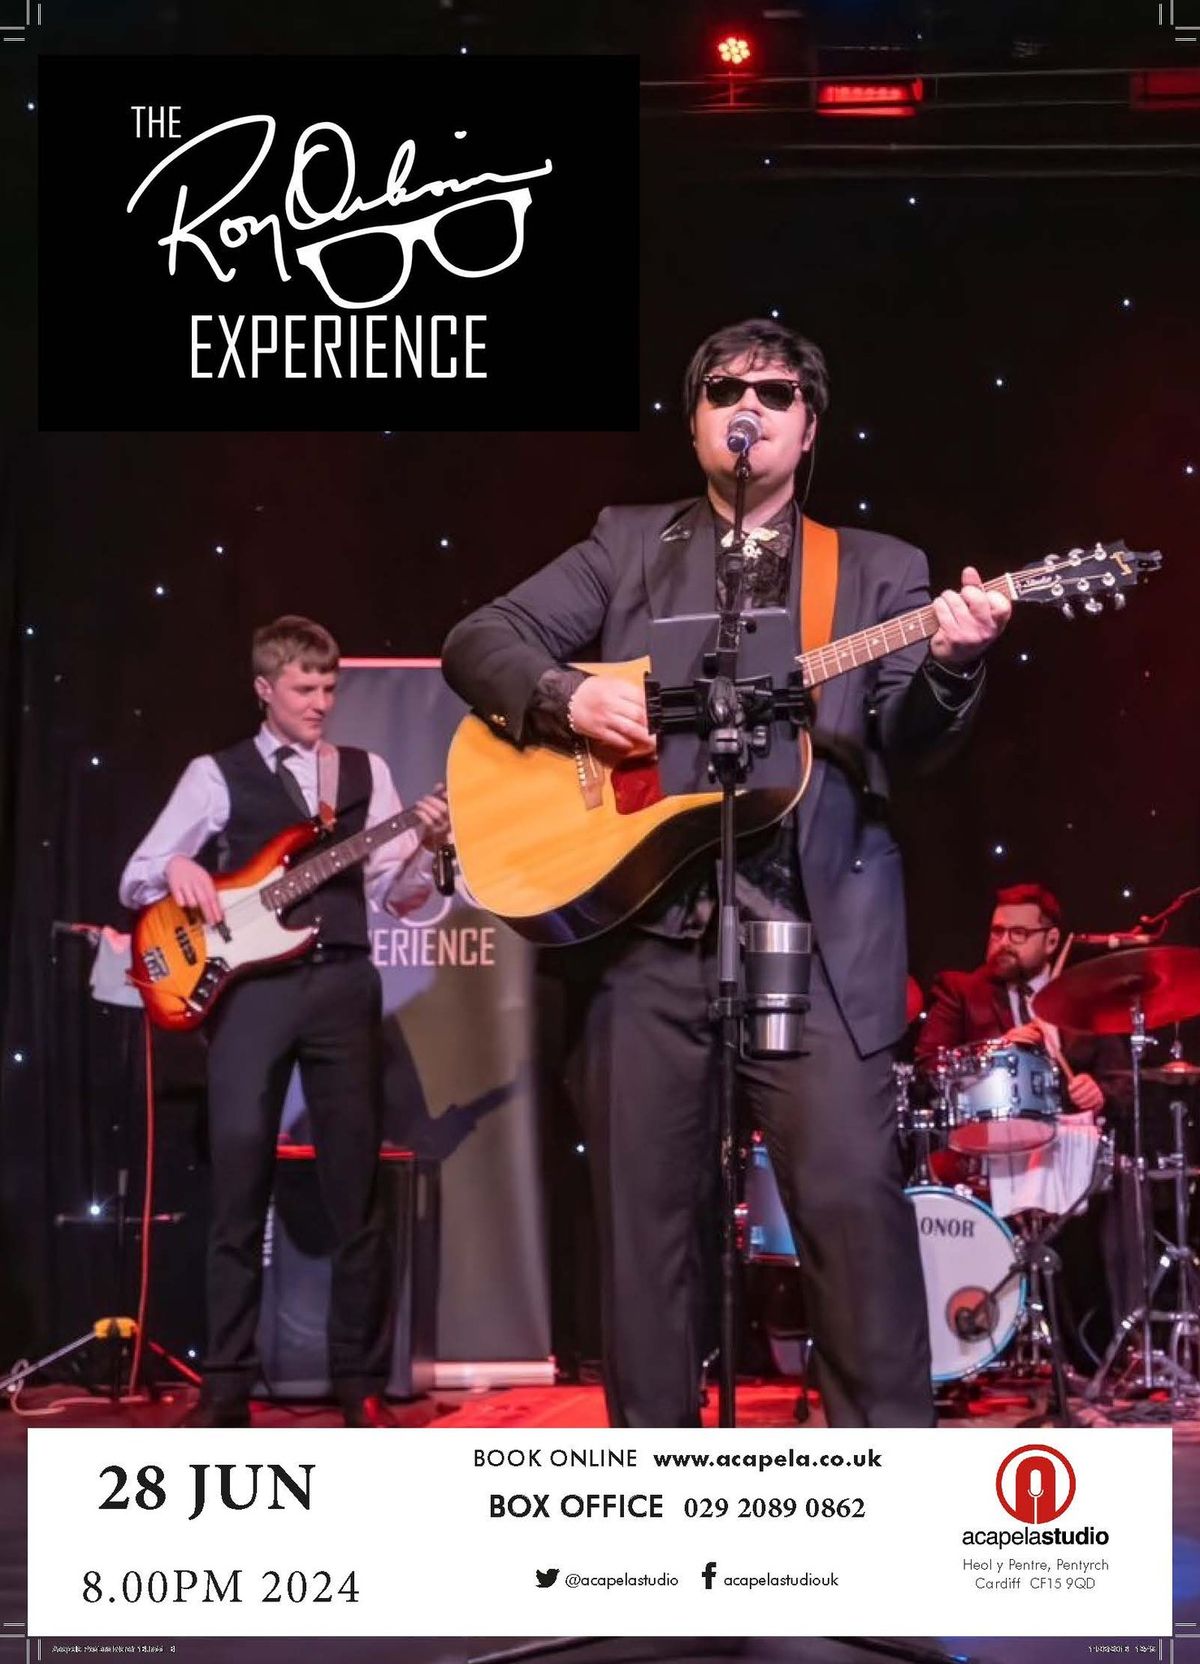 The Roy Orbison Experience 